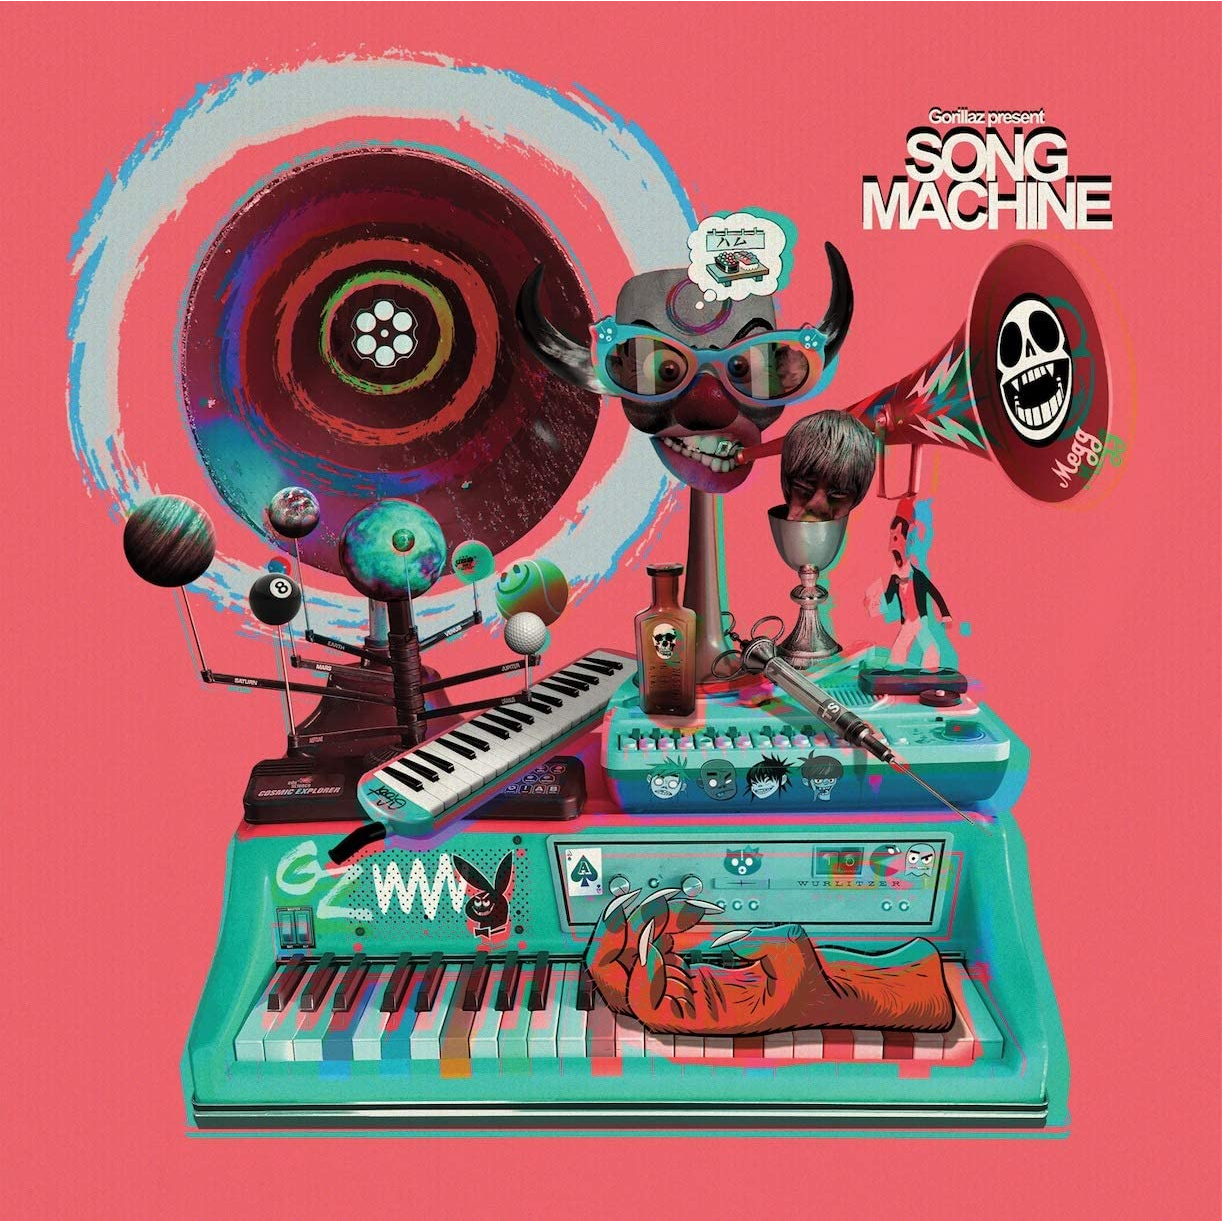 SONG MACHINE, SEASON 1 (DELUXE CD SOFTPACK EDITION)